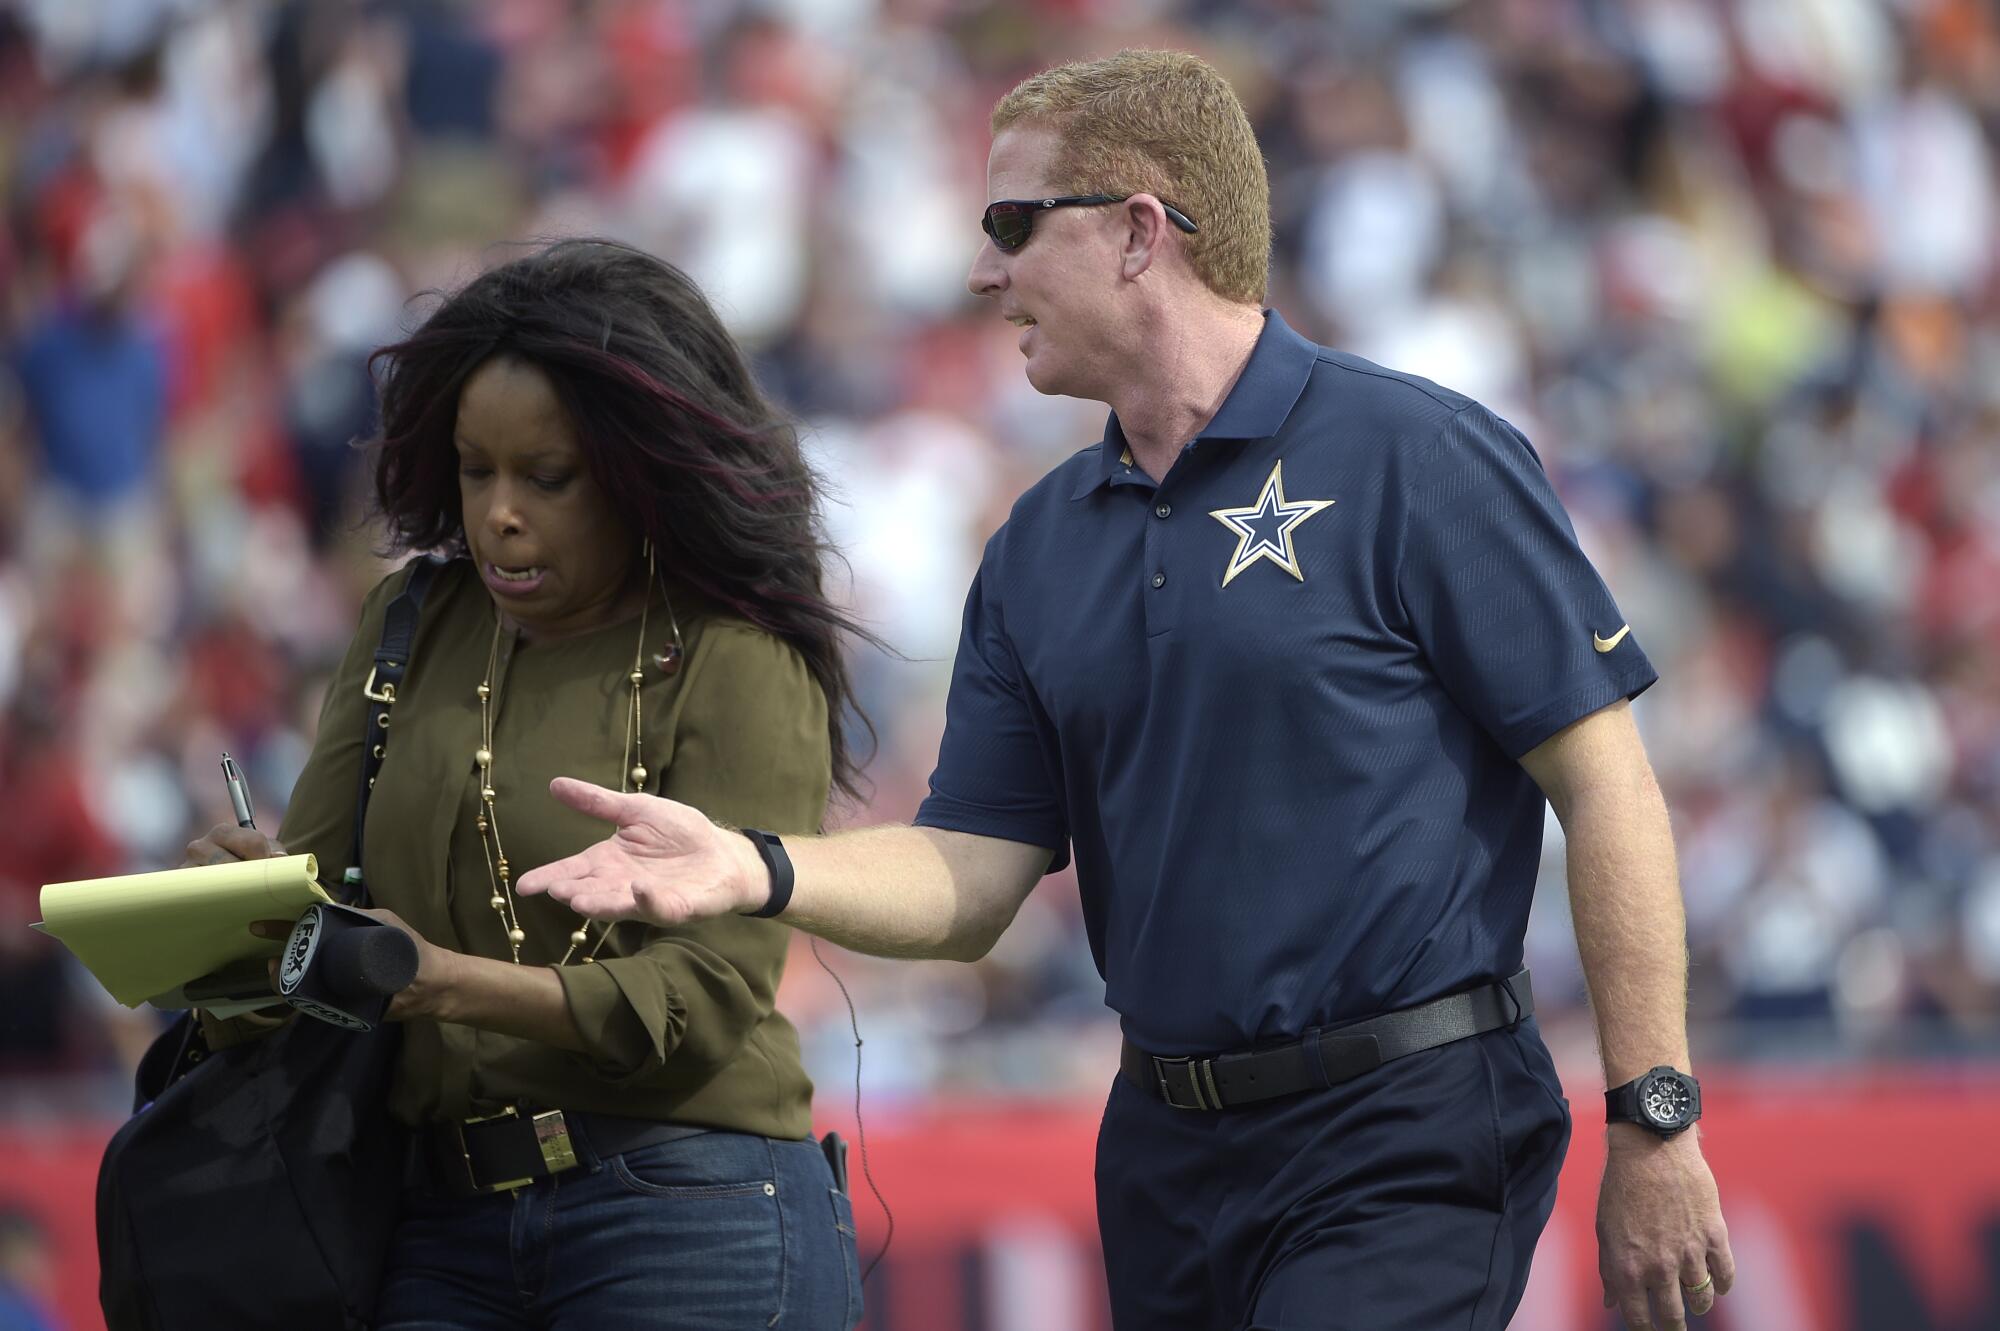 Fox Sports sideline reporter Pam Oliver writes in a notepad as she talks with Cowboys coach Jason Garrett during a game